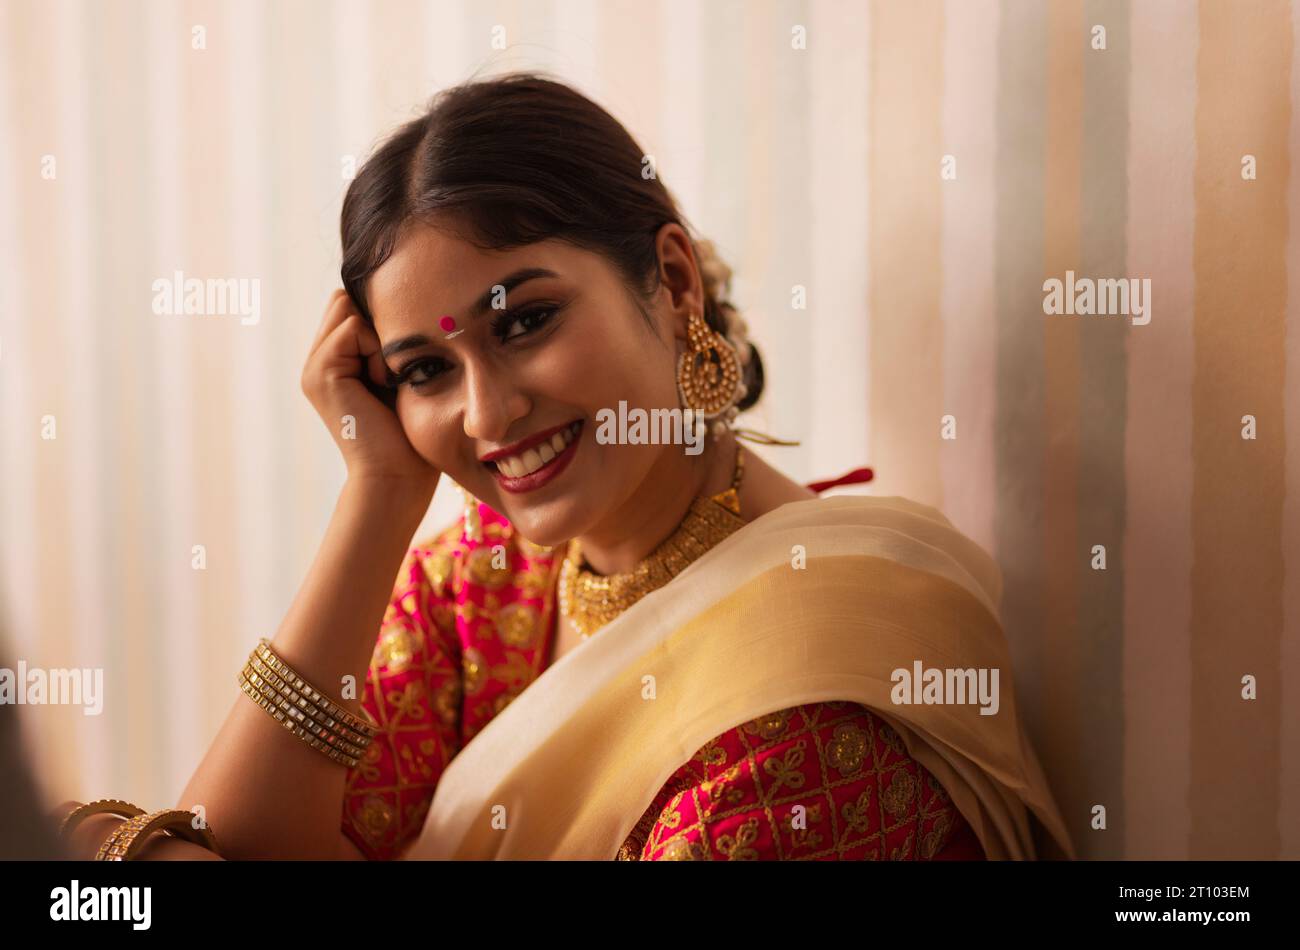 Close-up portrait of cheerful woman traditional outfit looking at camera Stock Photo